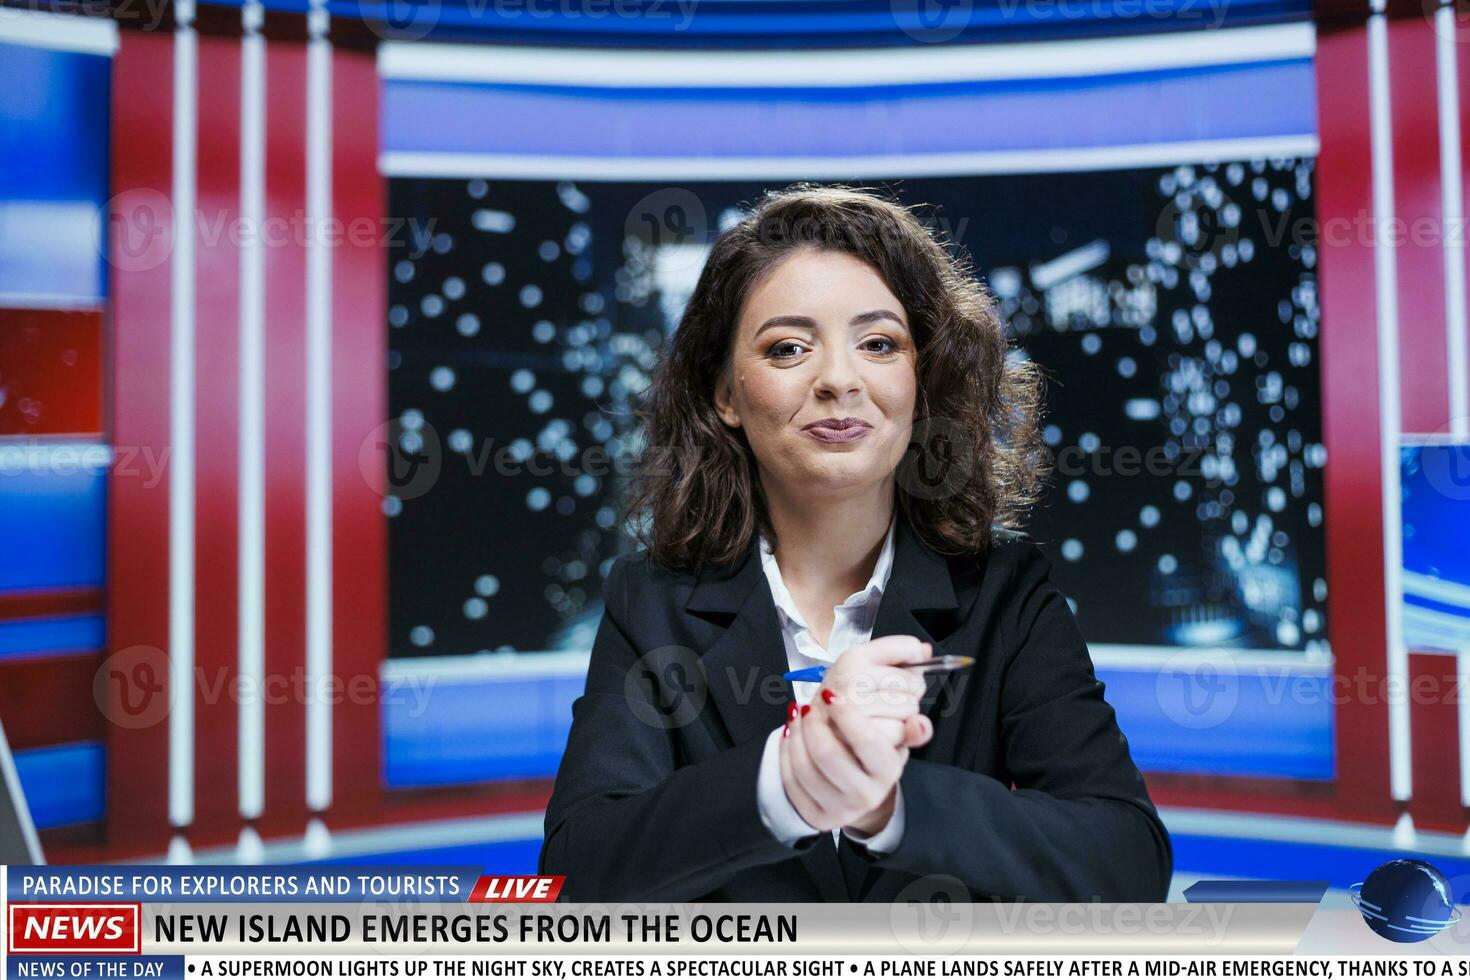 Rare natural phenomenon on live talk show presented by media reporter, new island emerges from the ocean creating new paradise exploration place. Newscaster introducing new holiday destination. photo